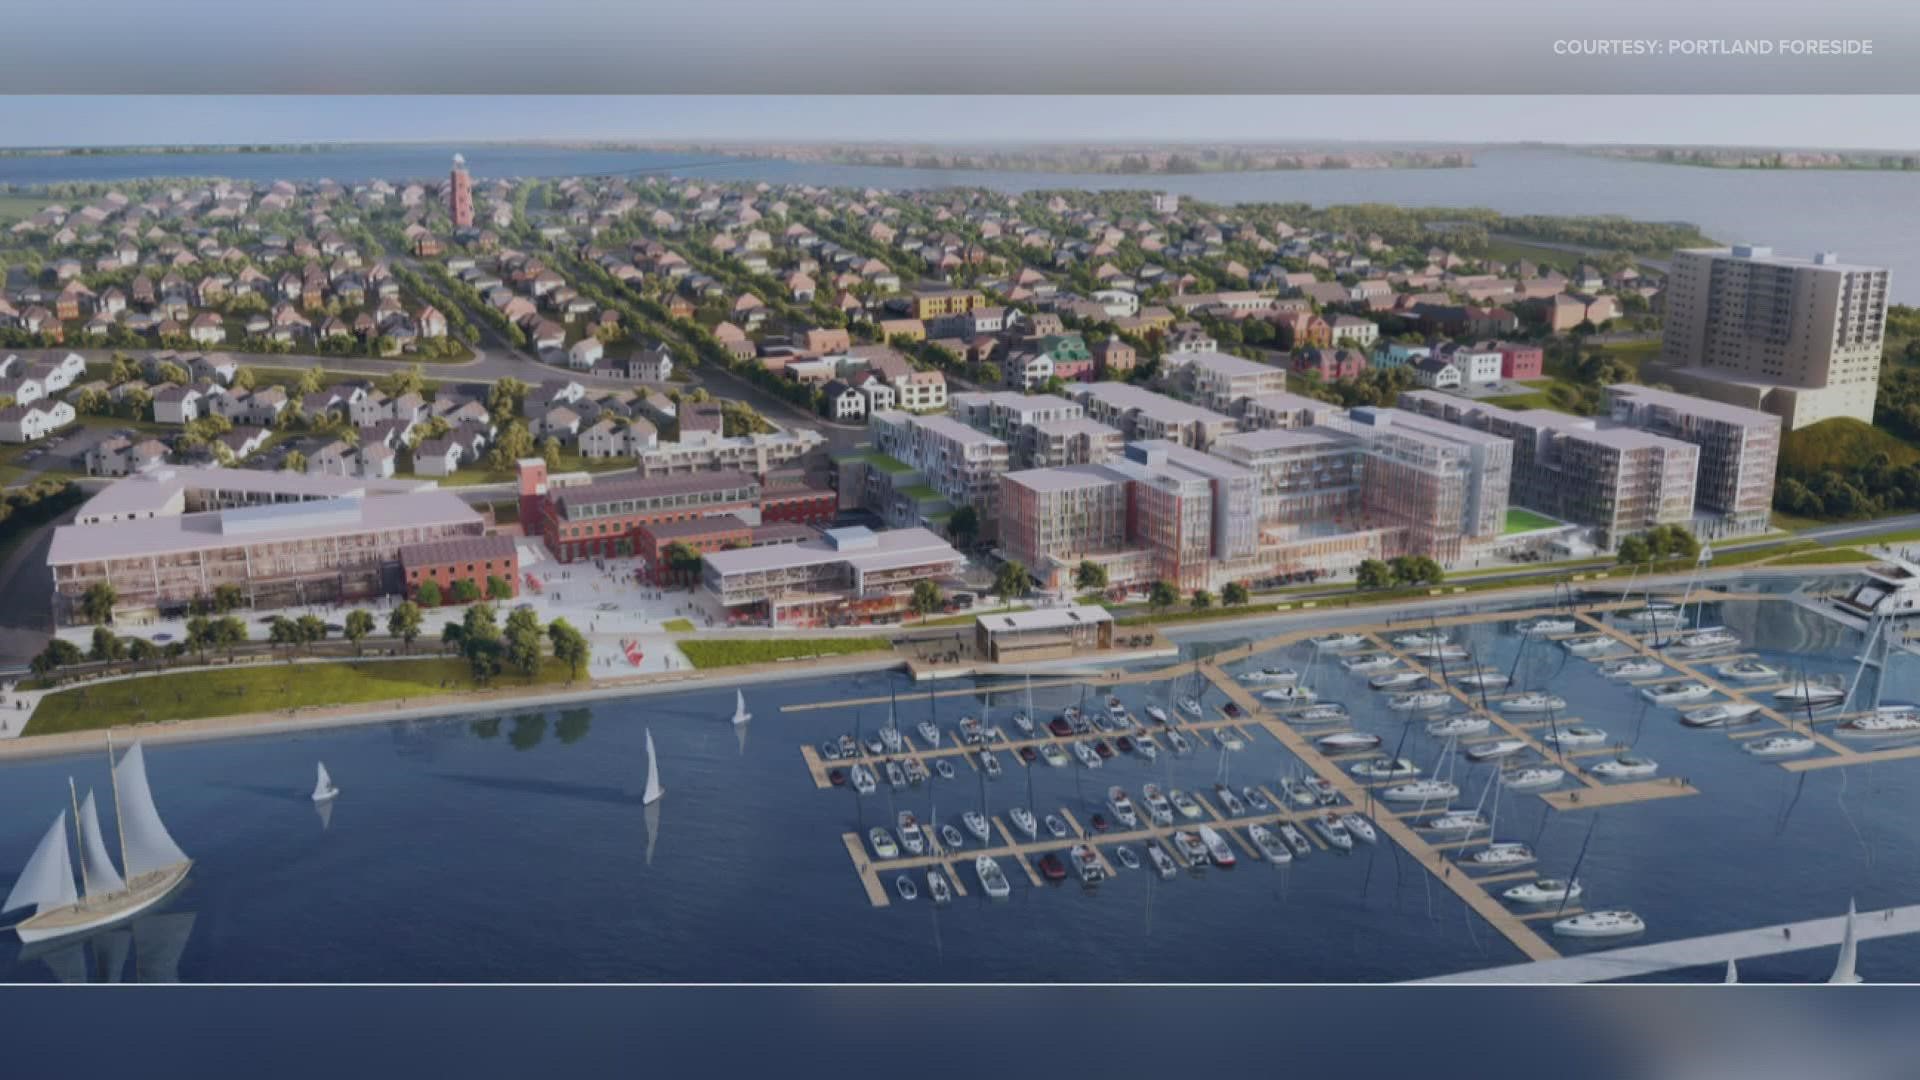 The project, which sits between Portland's Munjoy Hill neighborhood and the waterfront, is projected to be completed in the next six years.